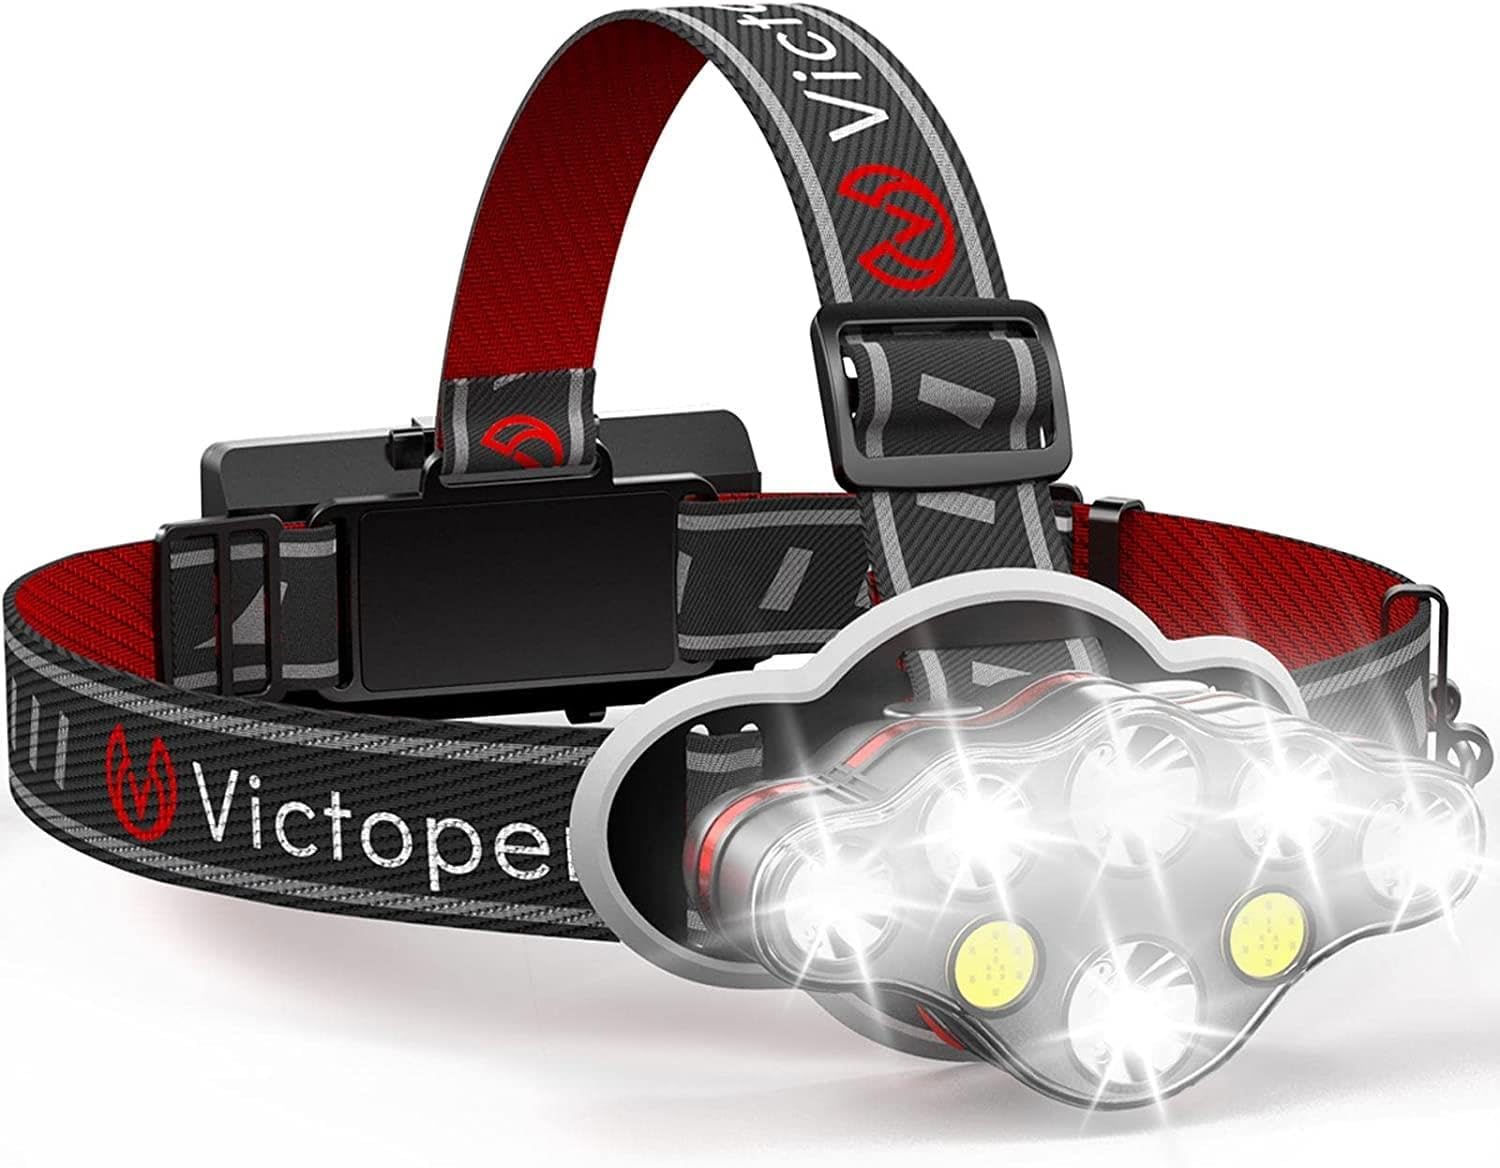 Victoper Rechargeable Headlamp with 8 LED